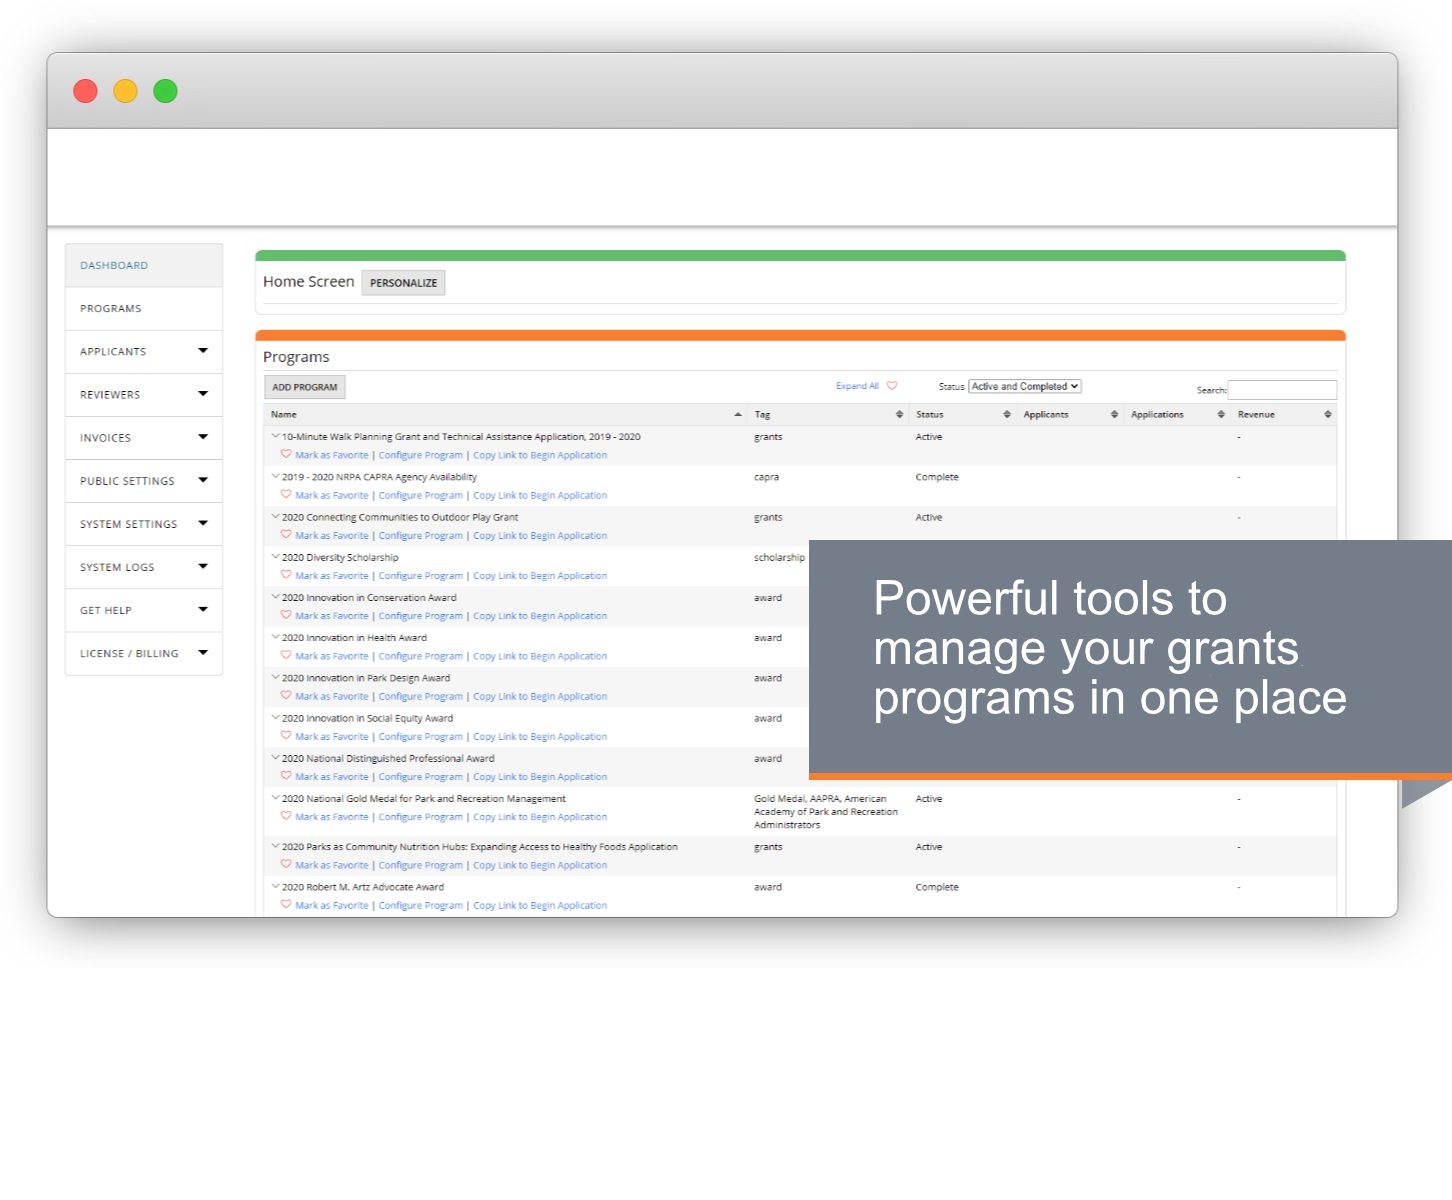 OpenWater Software - Have a full overview of the grants process. Communicate with reviewers and applicants quickly. Analyze and track your program’s success.